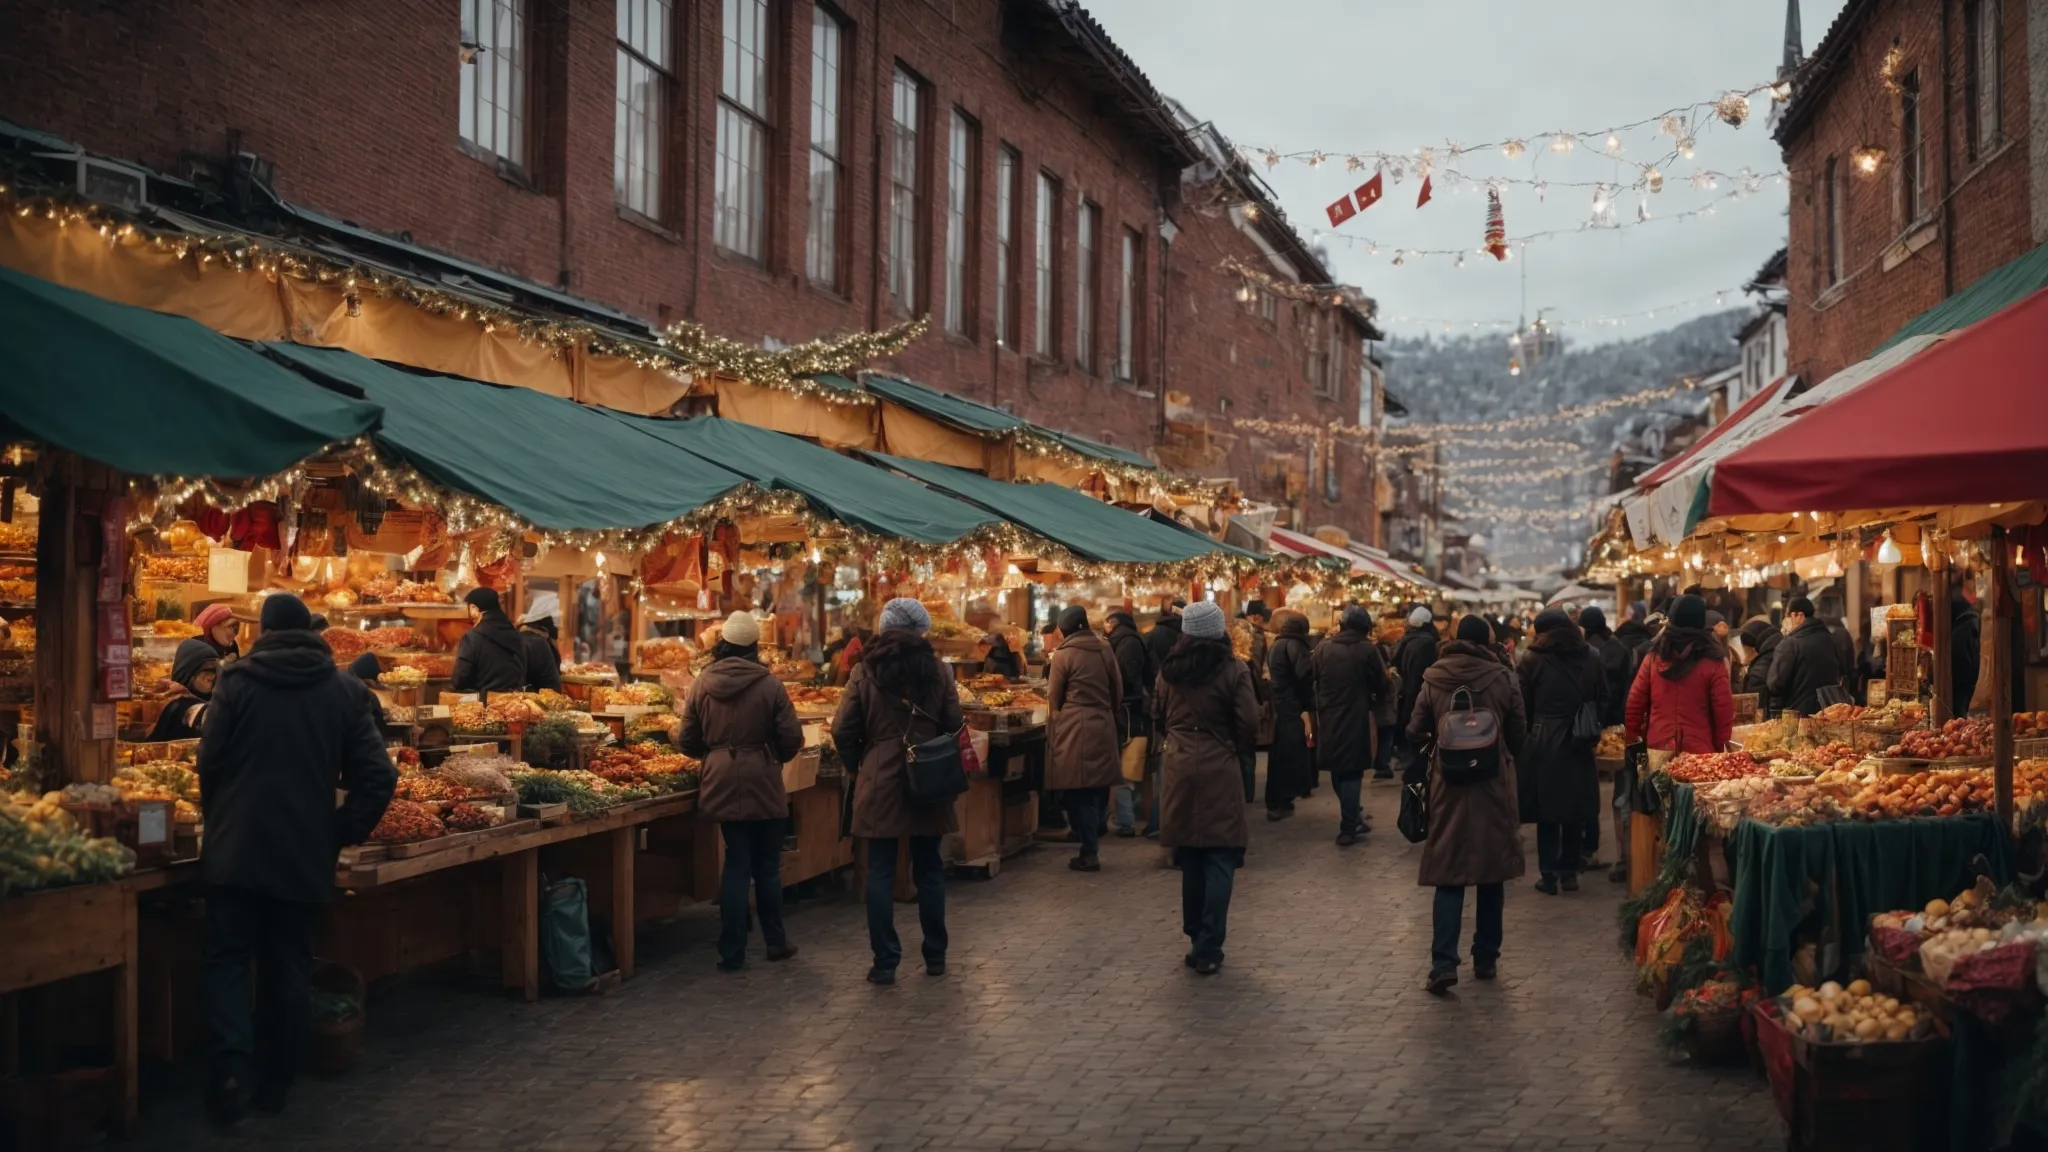 a bustling holiday marketplace with festively decorated storefronts.